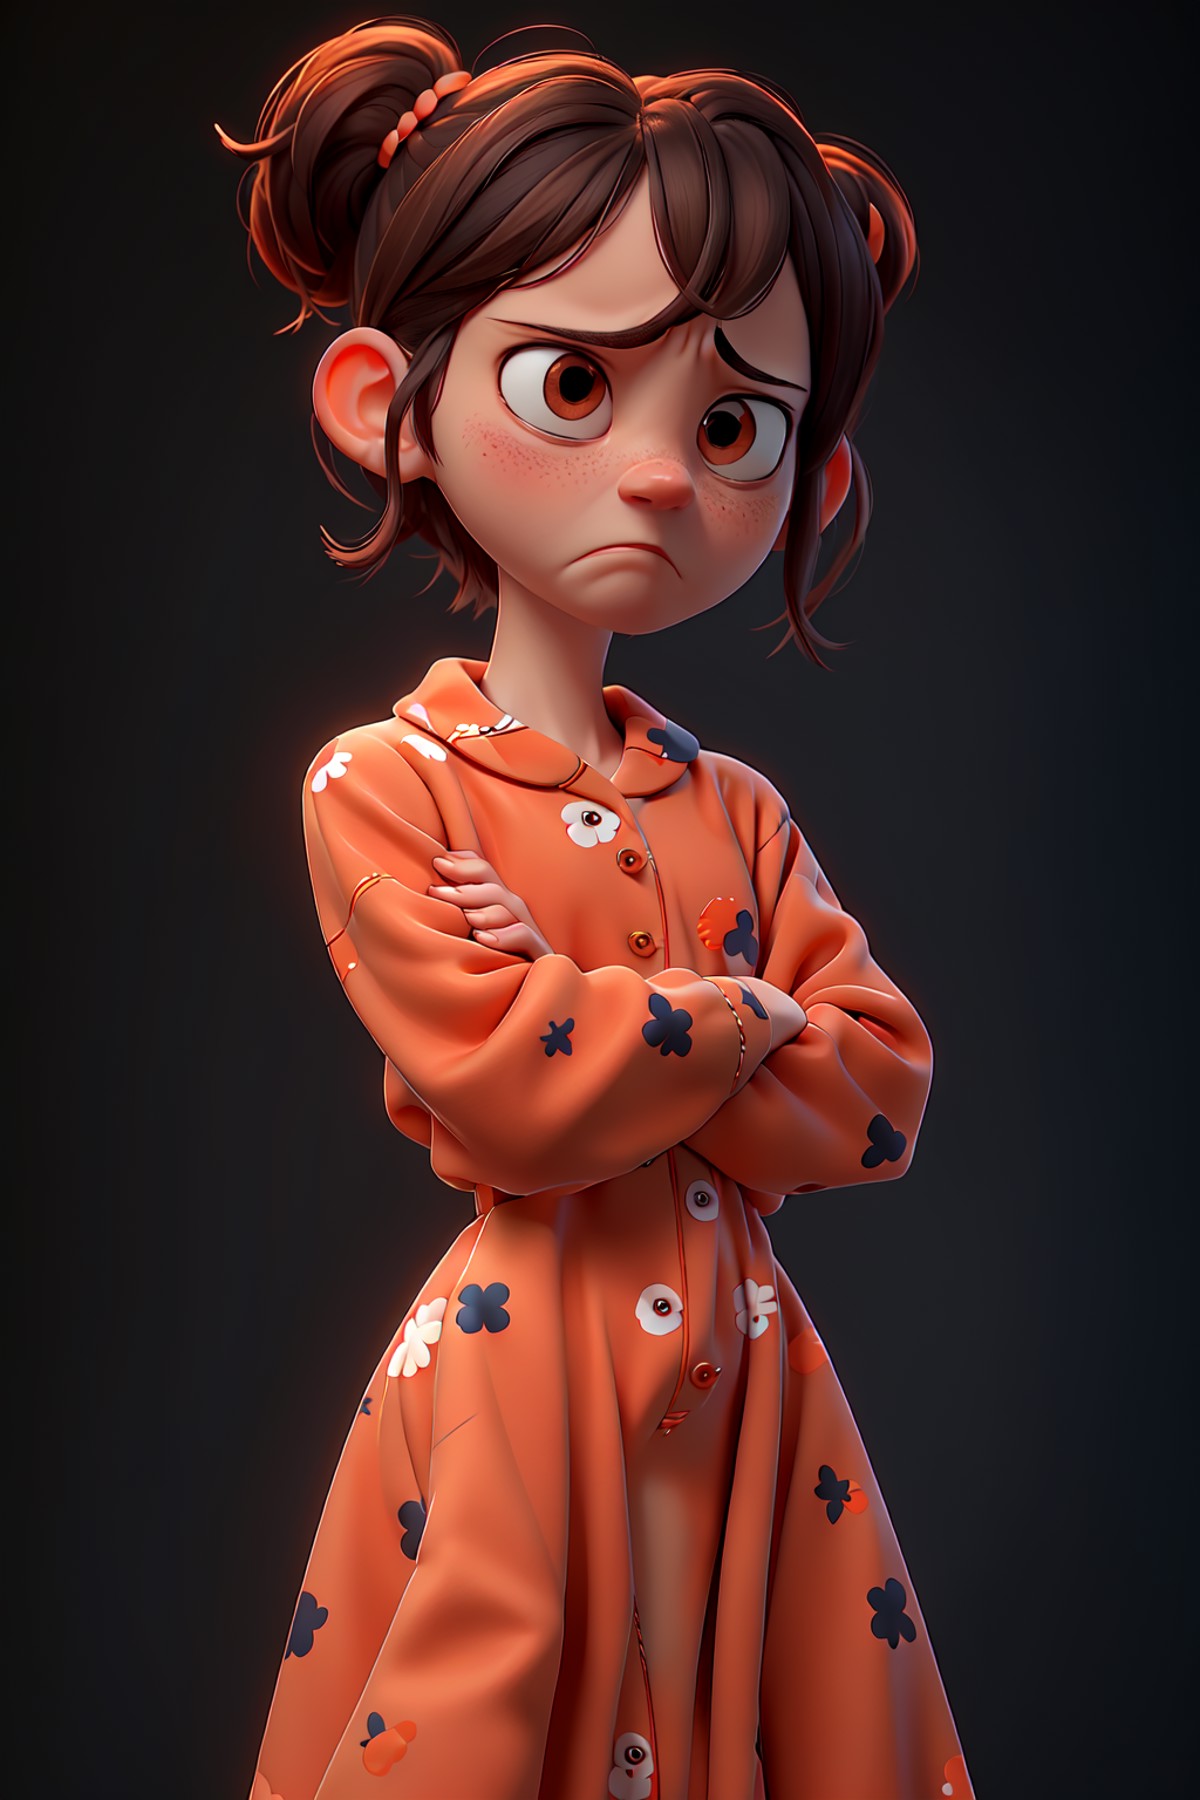 masterpiece, best quality,a sad little girl wearing orange pajamas, sad mouth, her arms crossed, black background